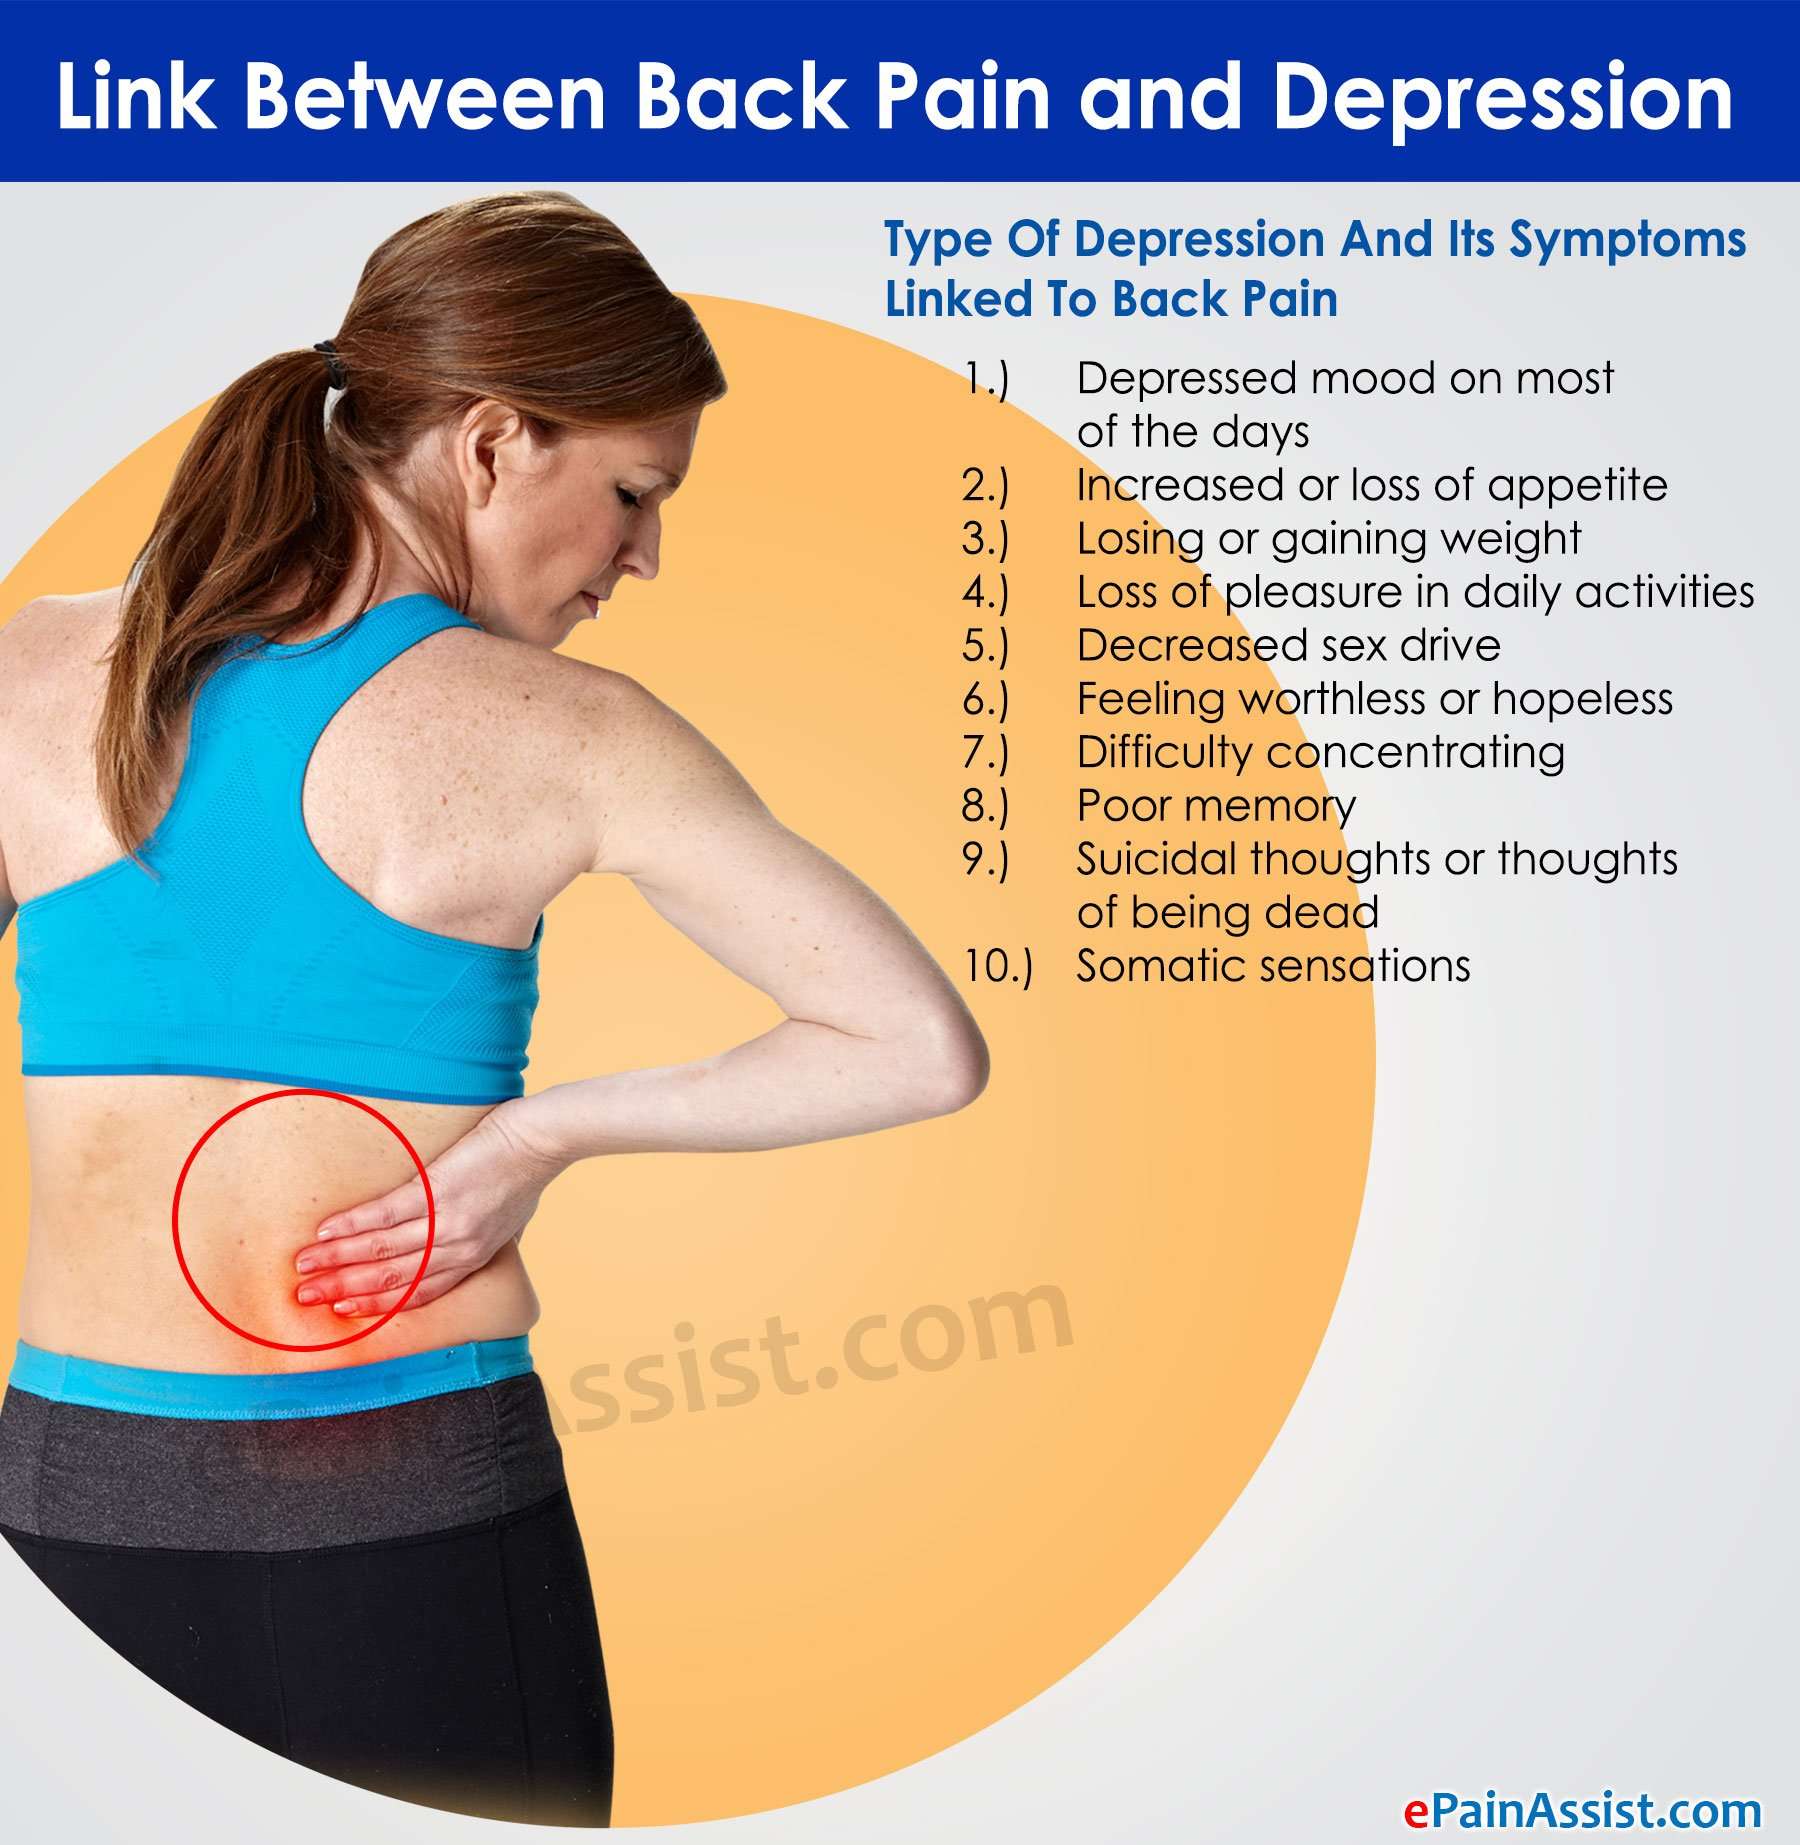 Link Between Back Pain and Depression